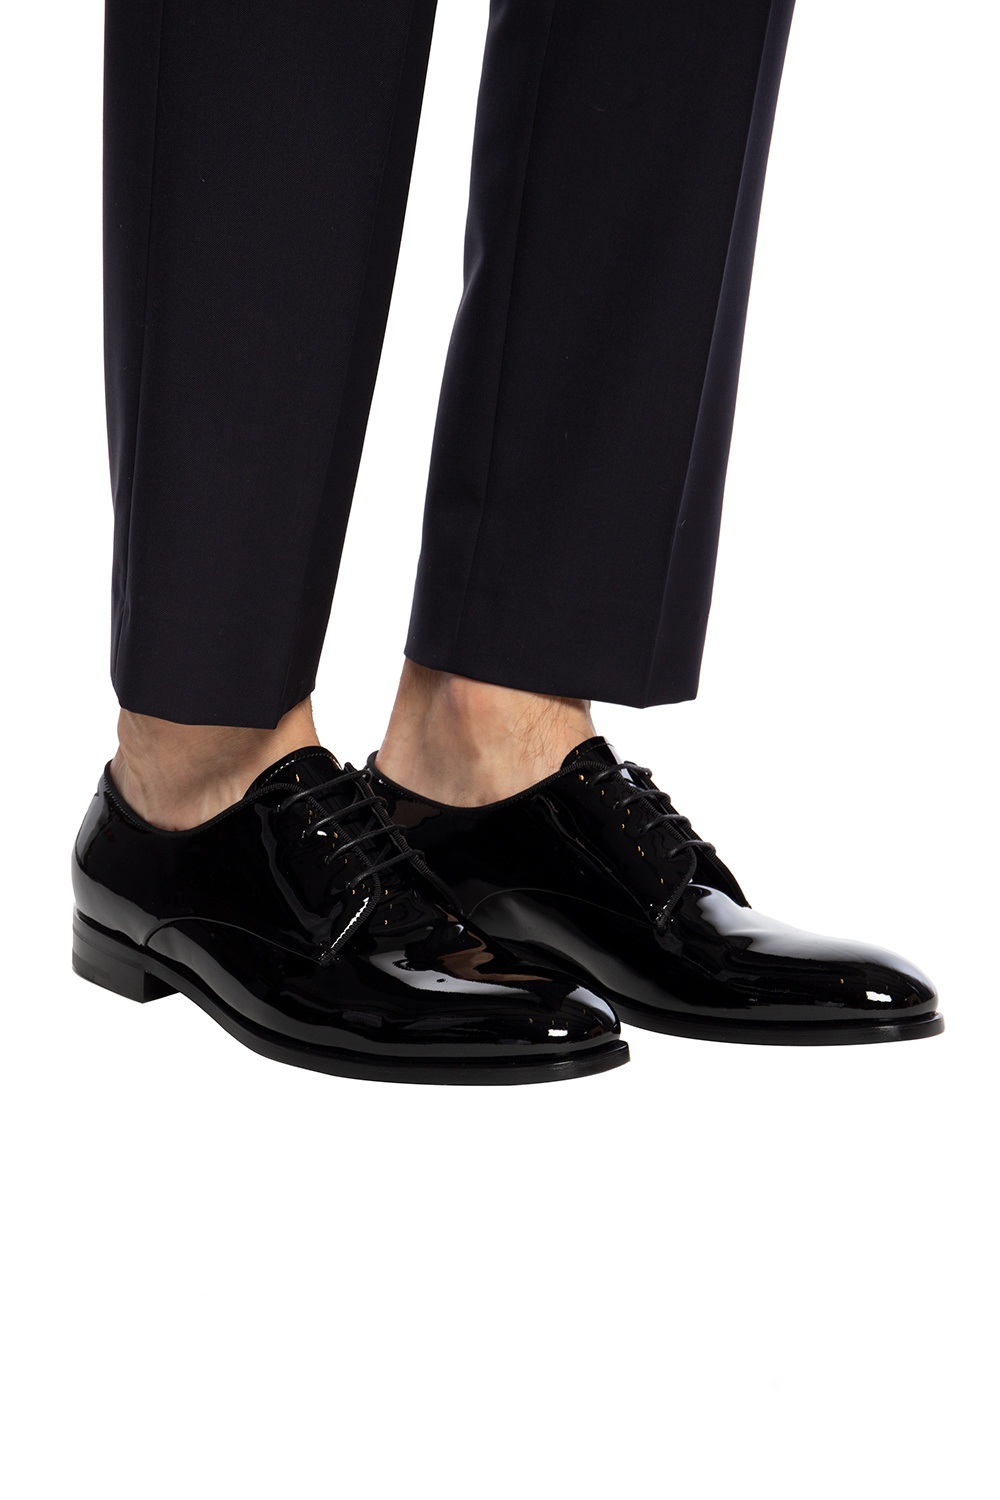 armani patent leather shoes